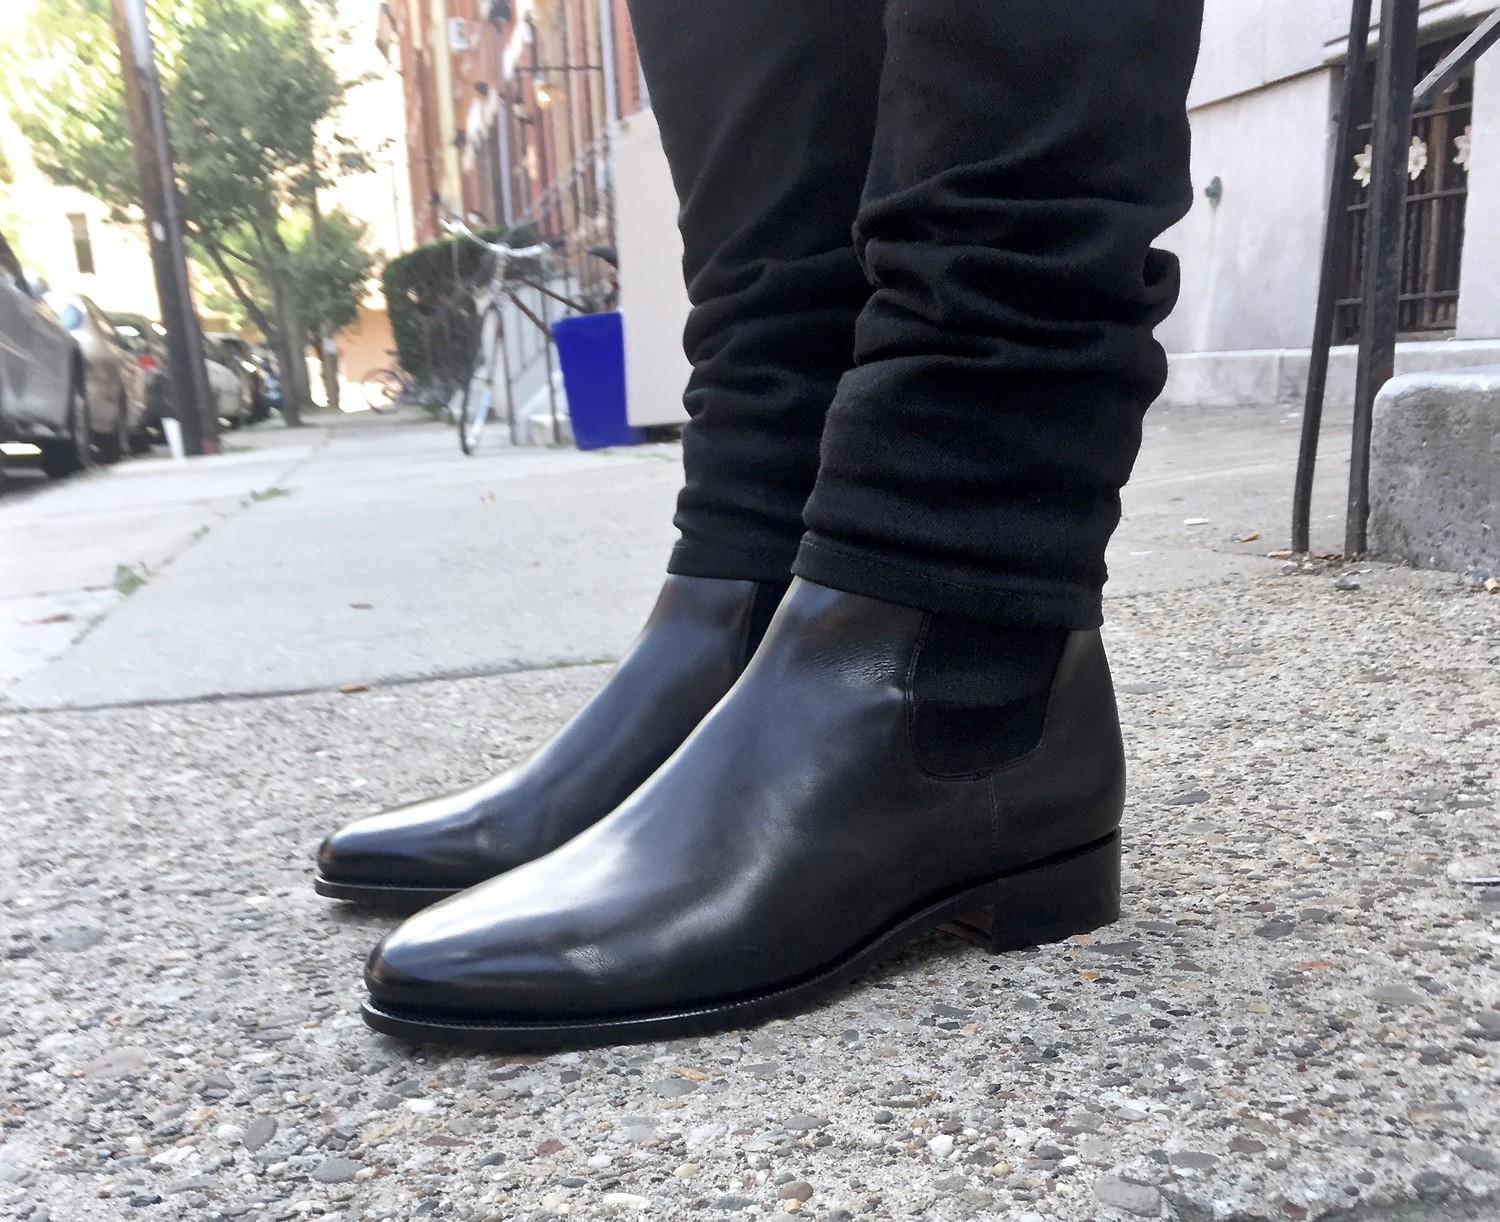 Chelsea Boots: Yay or Nay? | NeoGAF